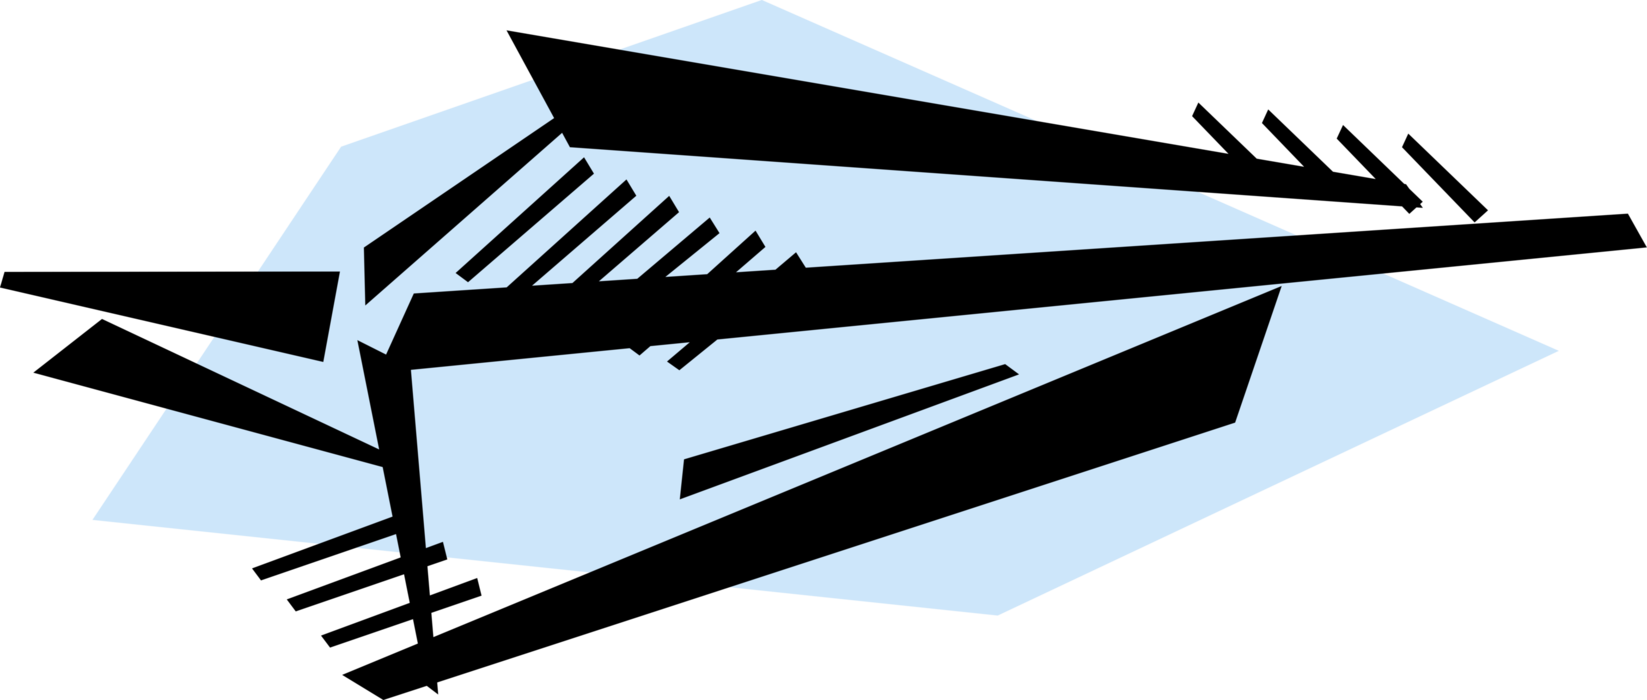 Vector Illustration of Paper Airplane Toy Aircraft Glider